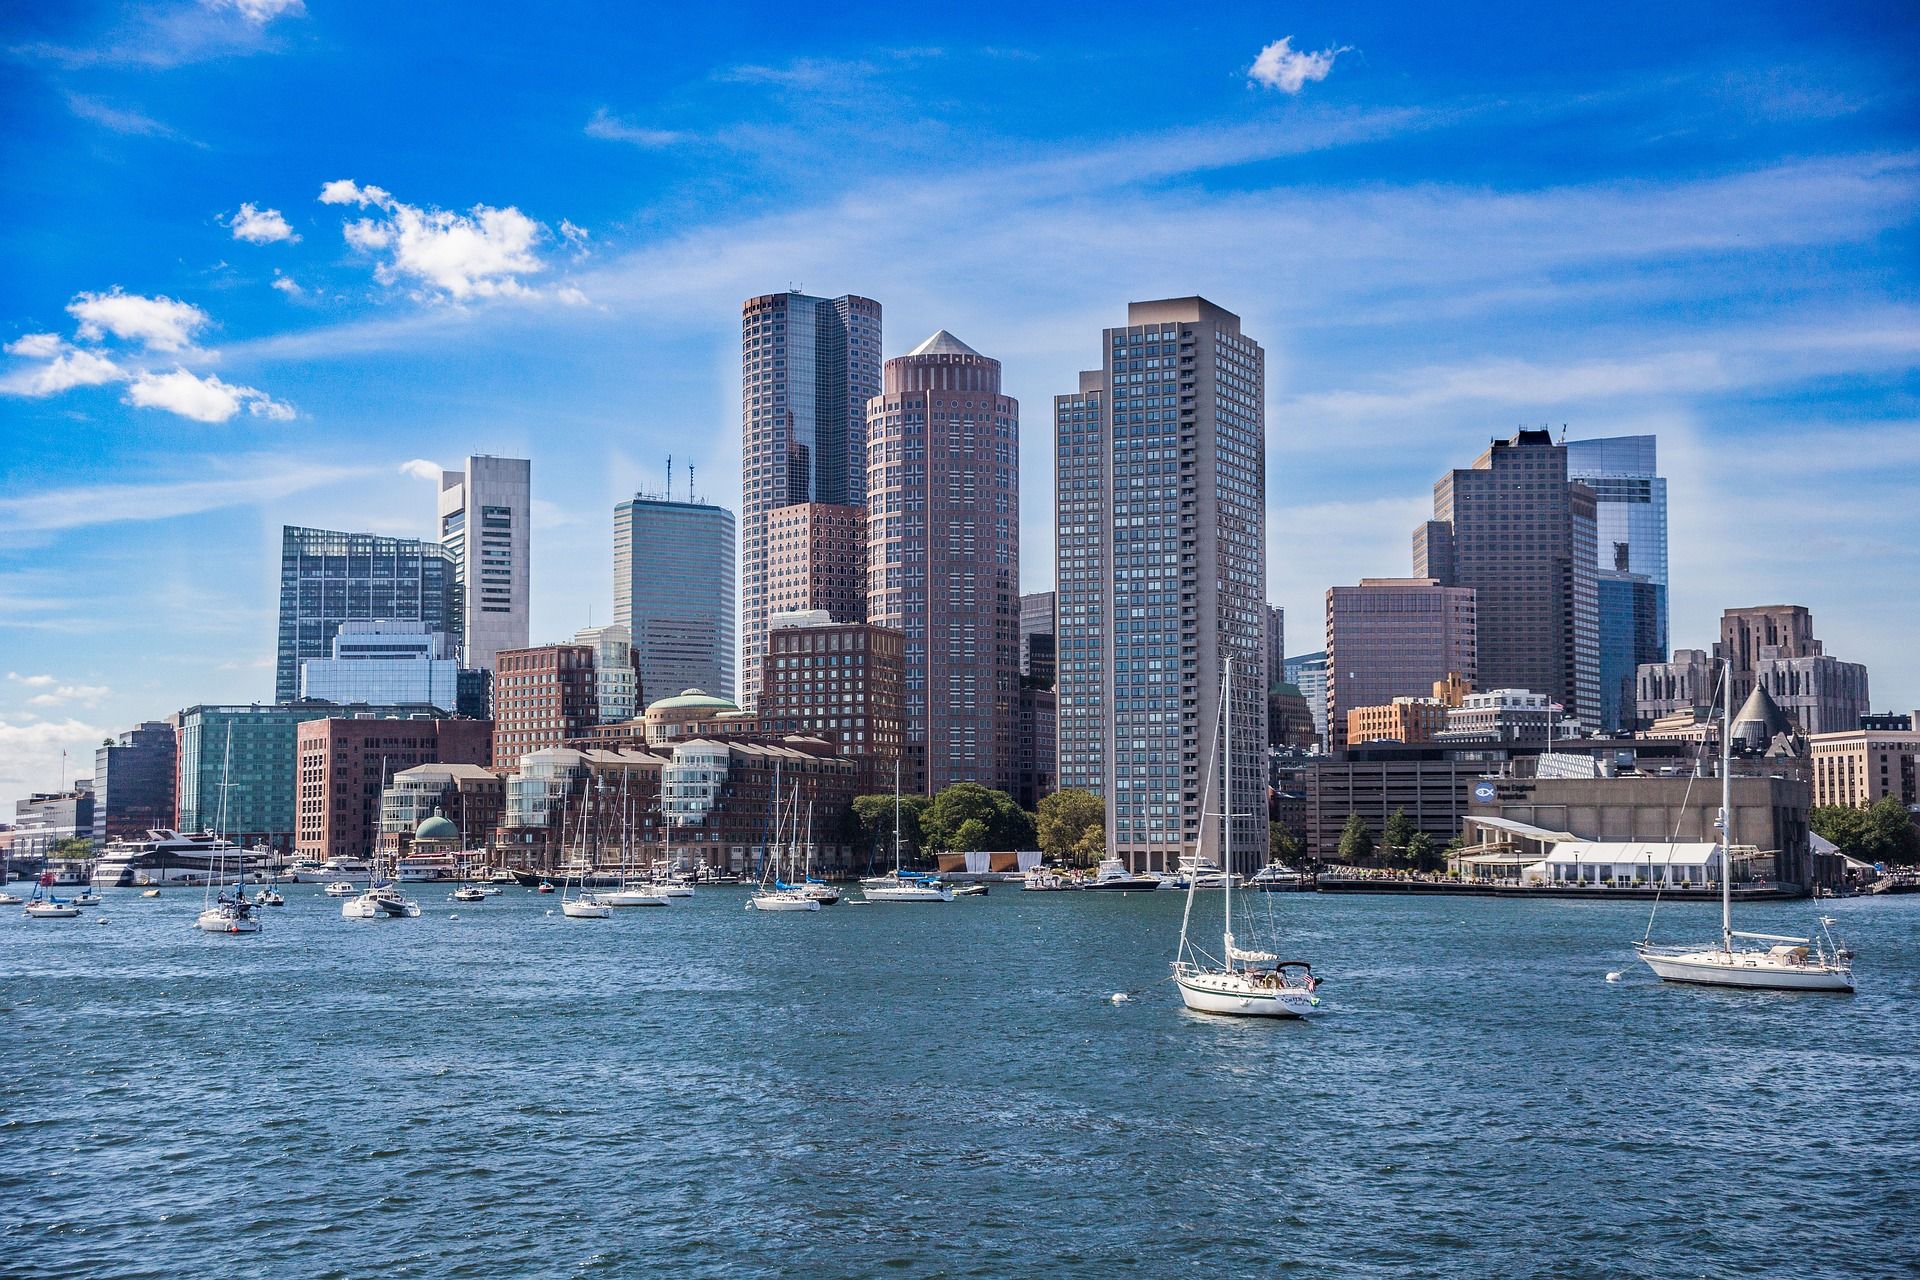 Our Top US Cities: Part 3 - Boston